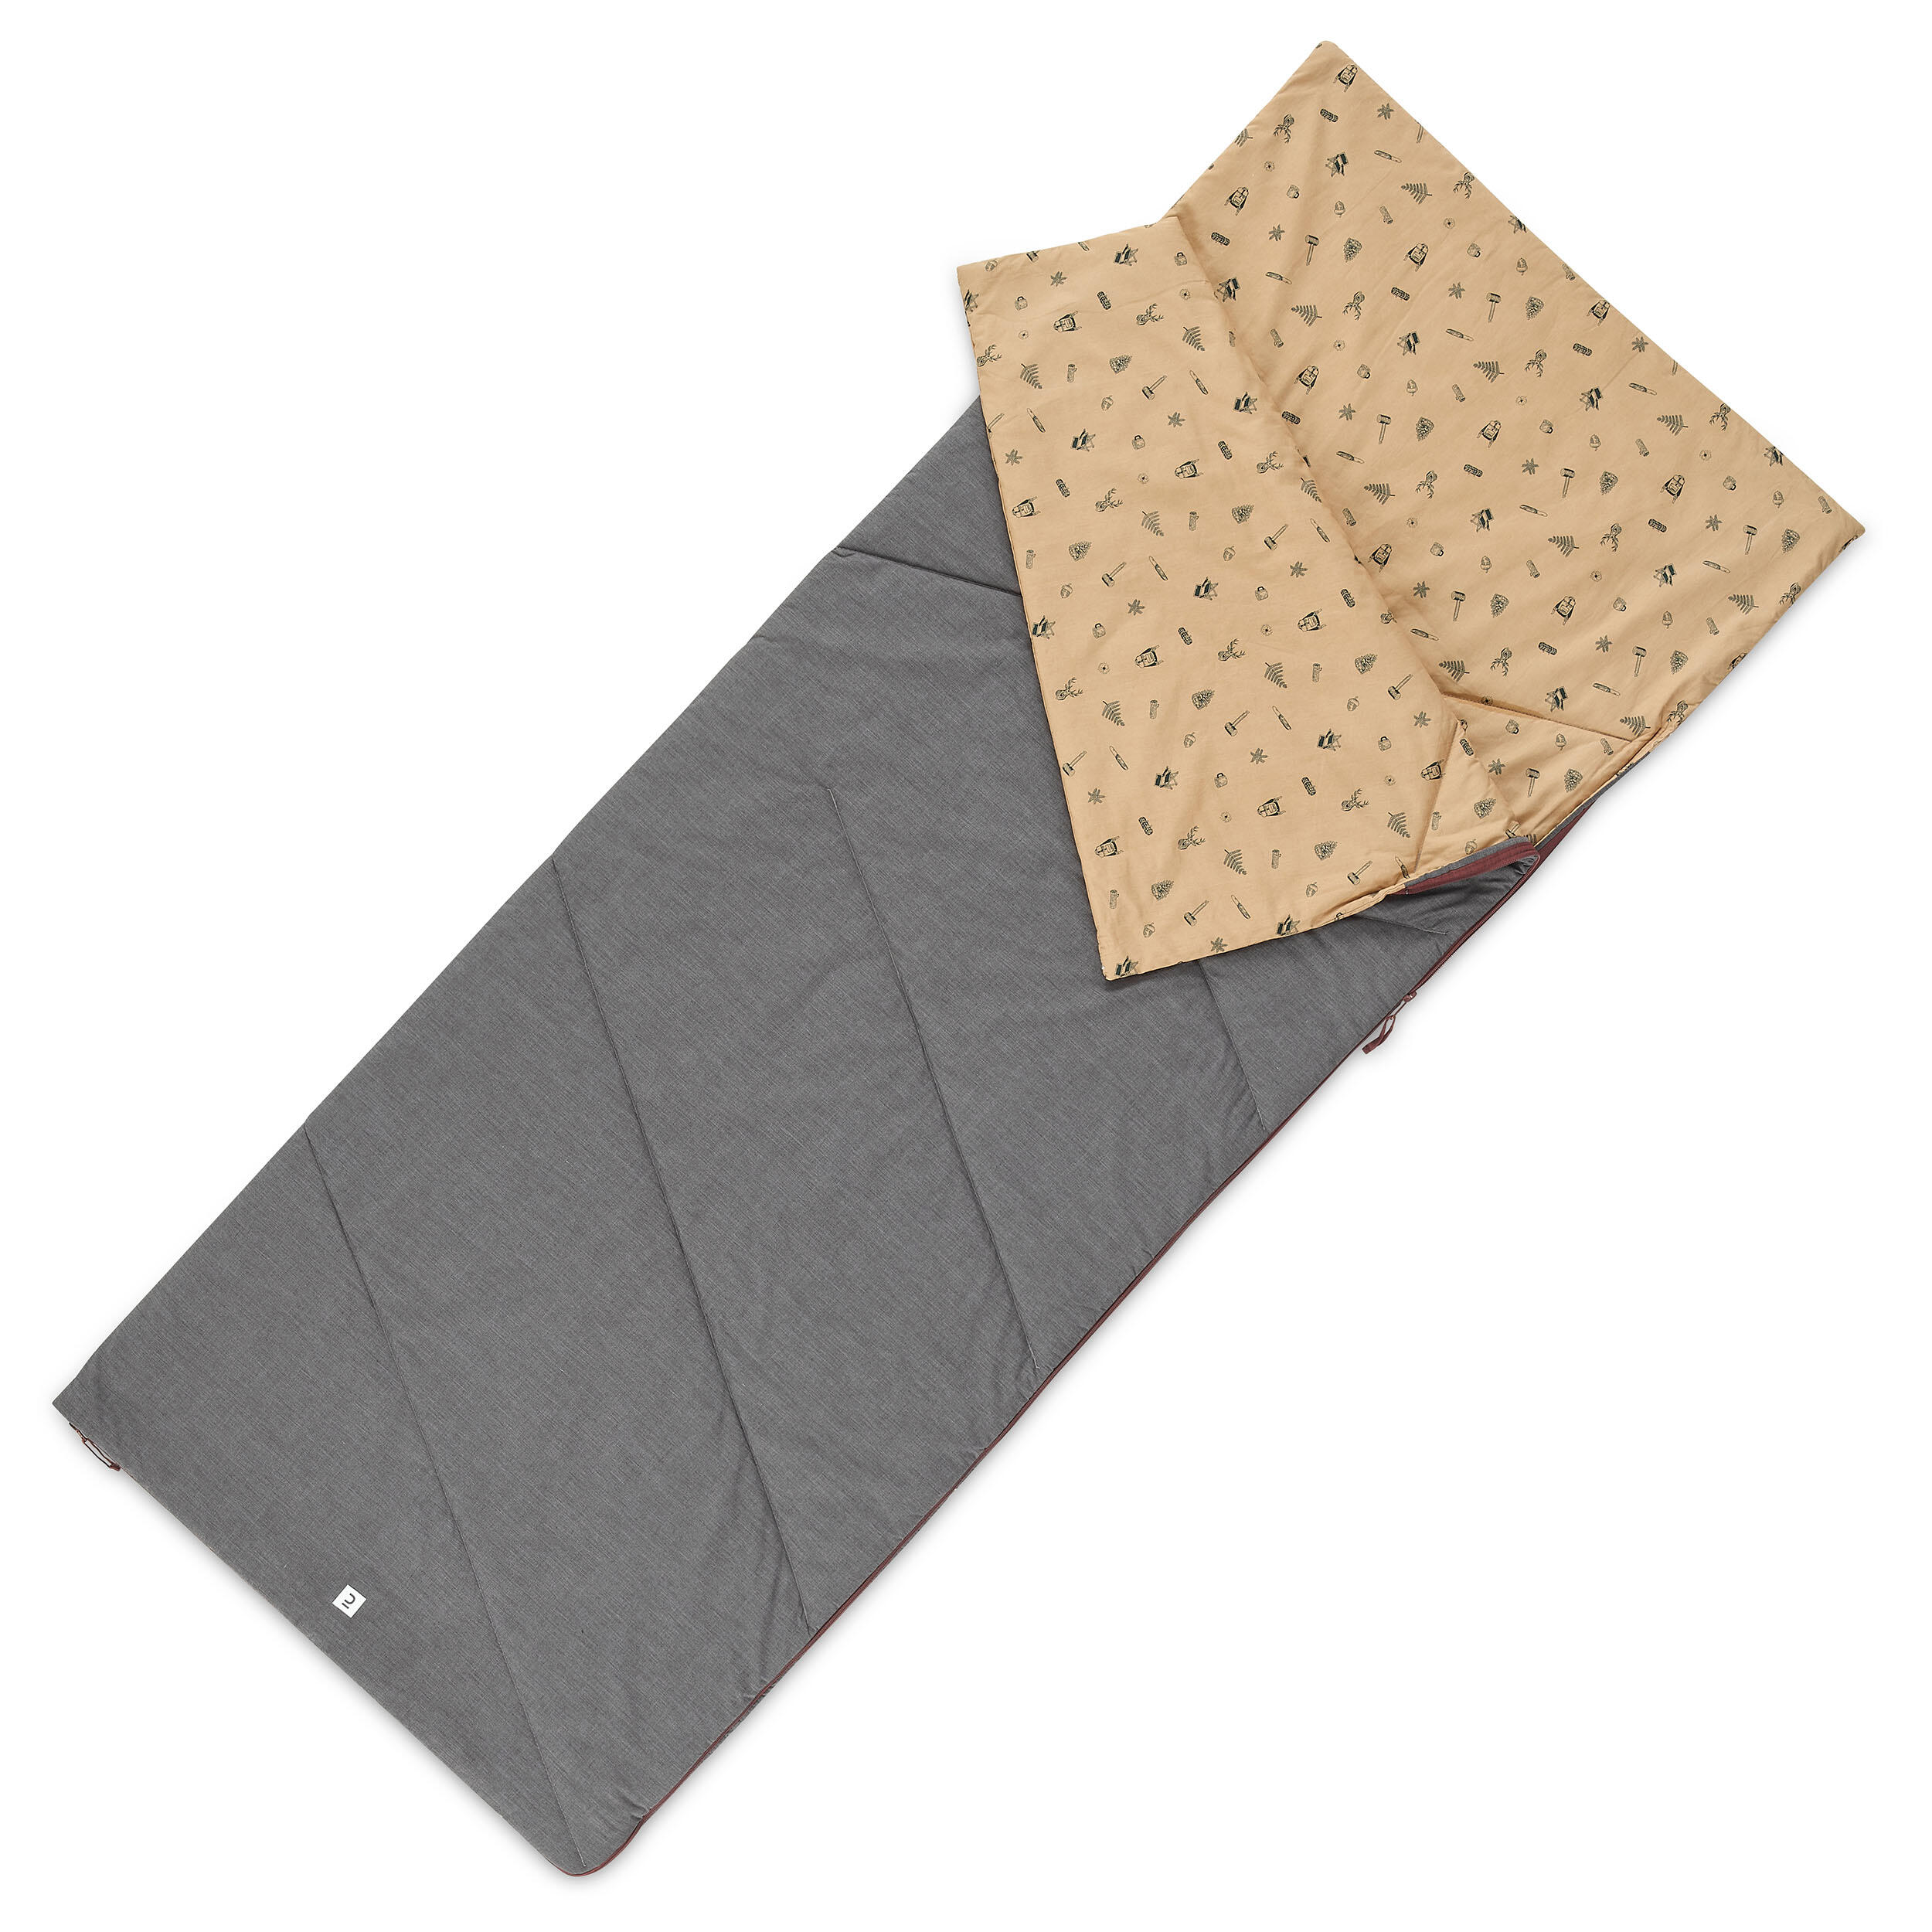 COTTON SLEEPING BAG FOR CAMPING - ARPENAZ 20° COTTON 1/8